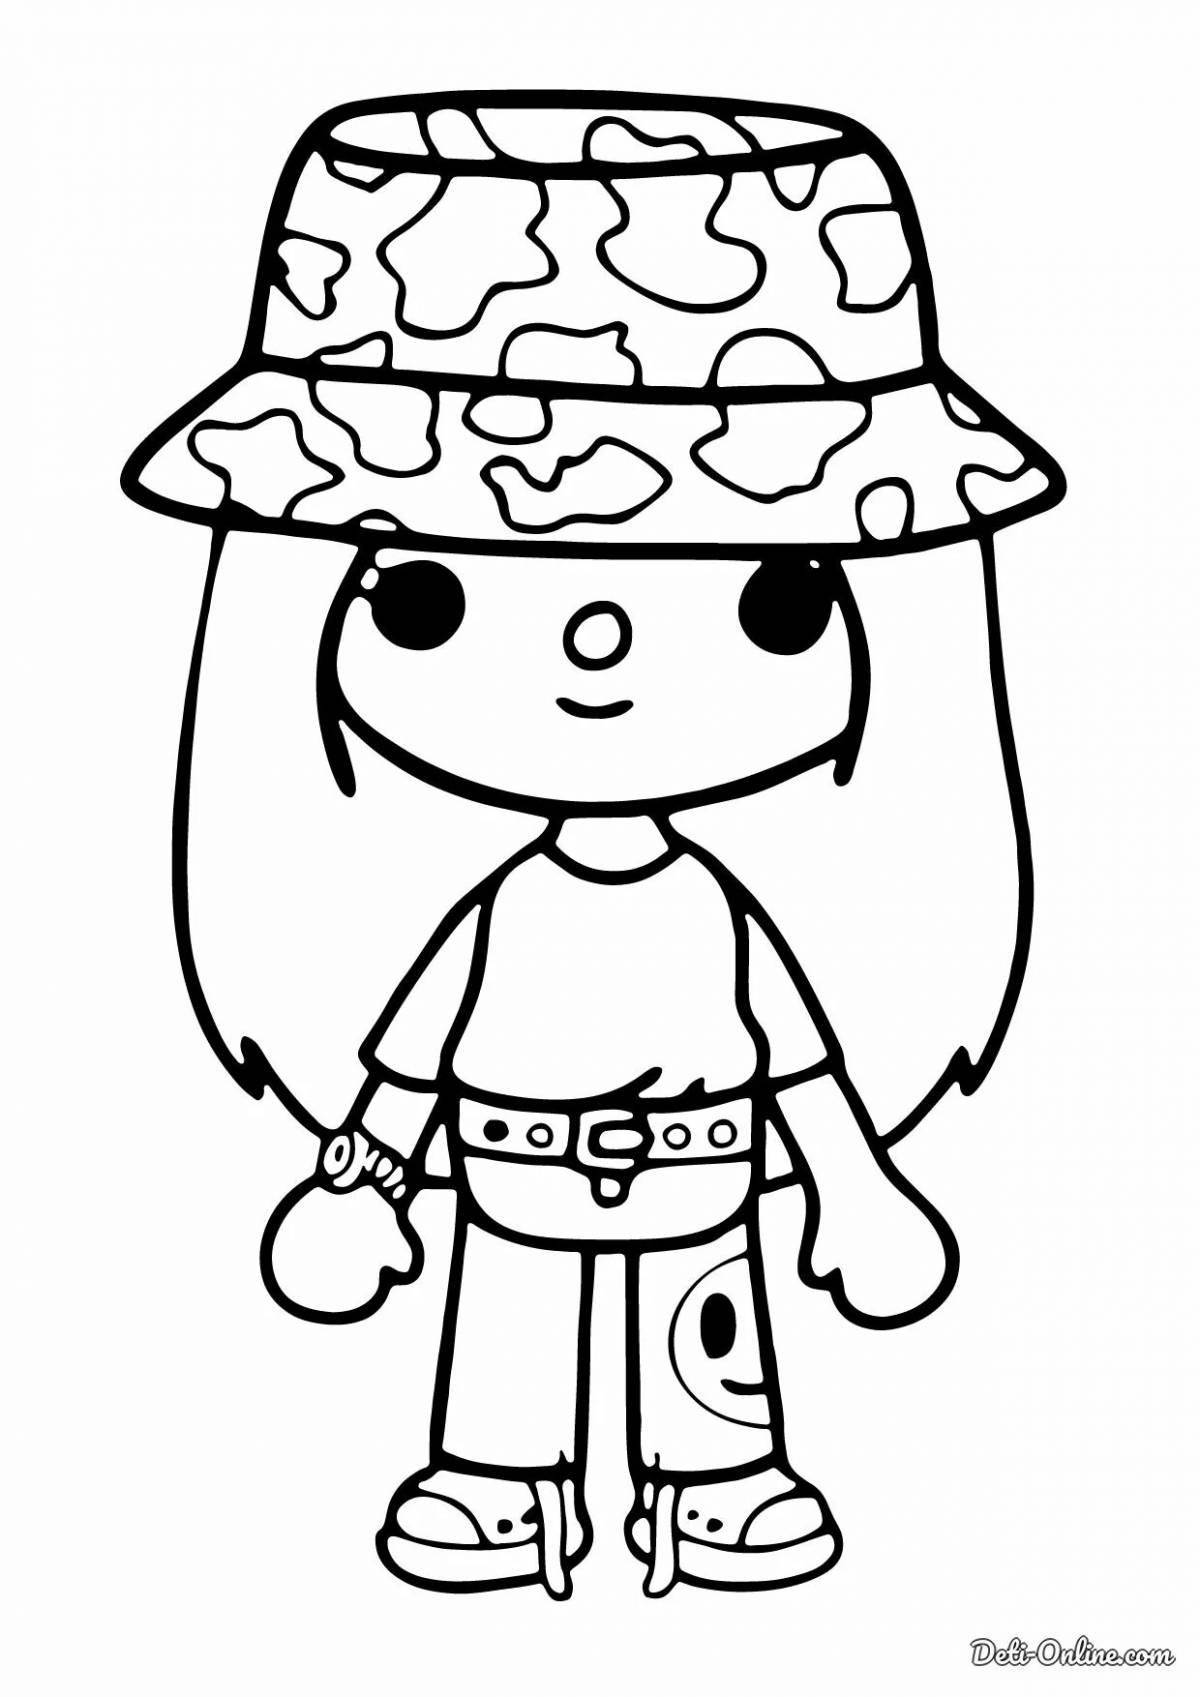 Glitter white current side coloring page